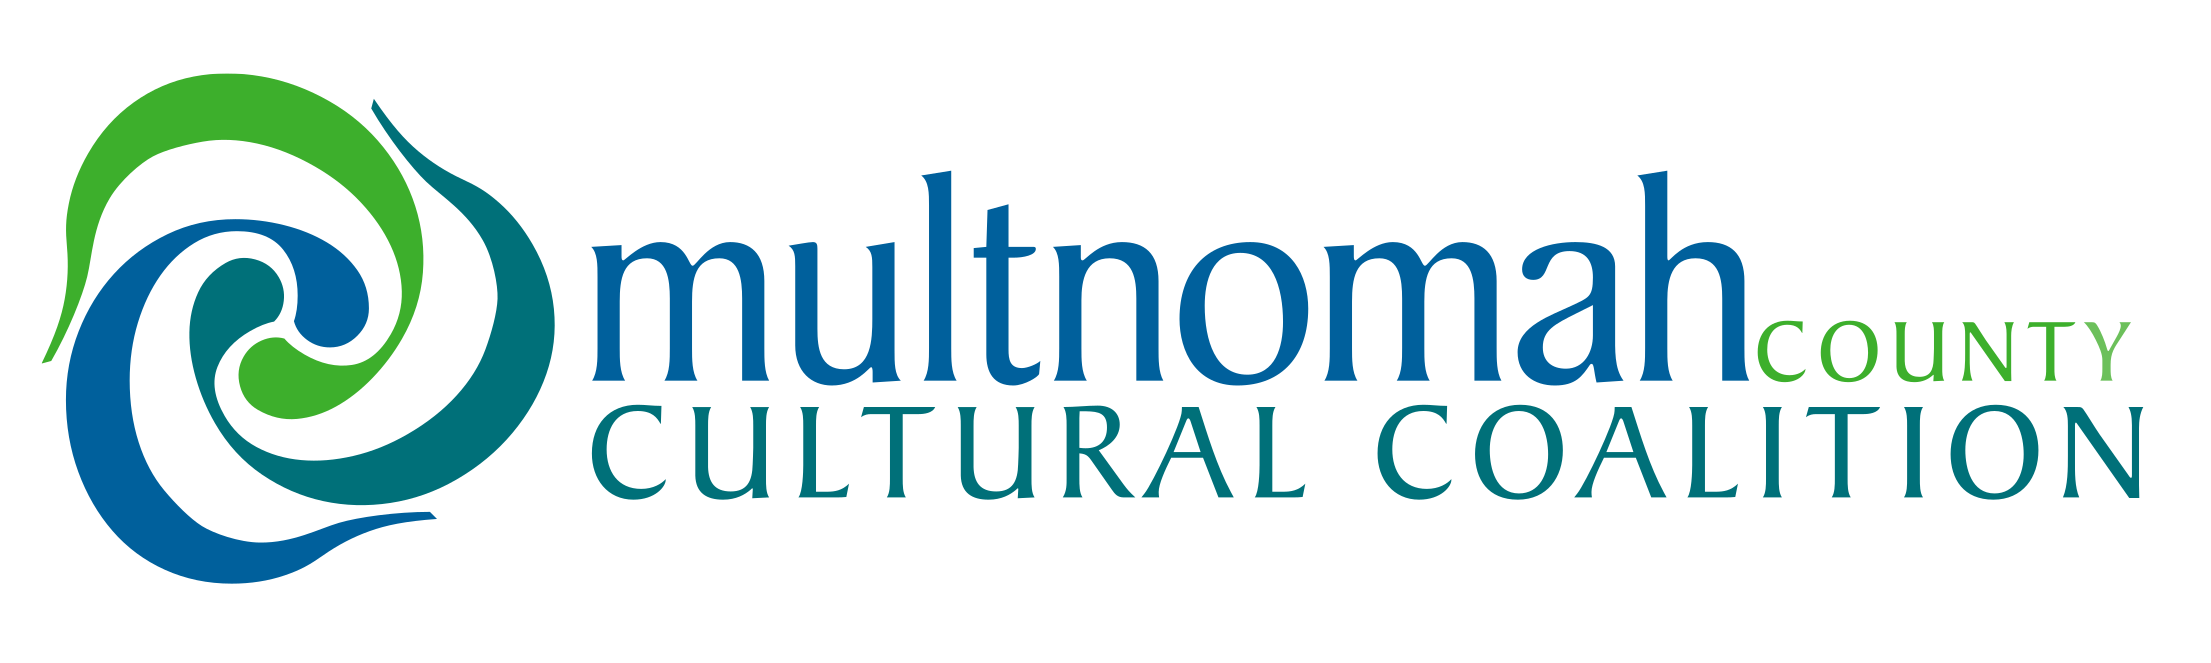 Multnomah County Cultural Coalition and the Oregon Cultural Trust